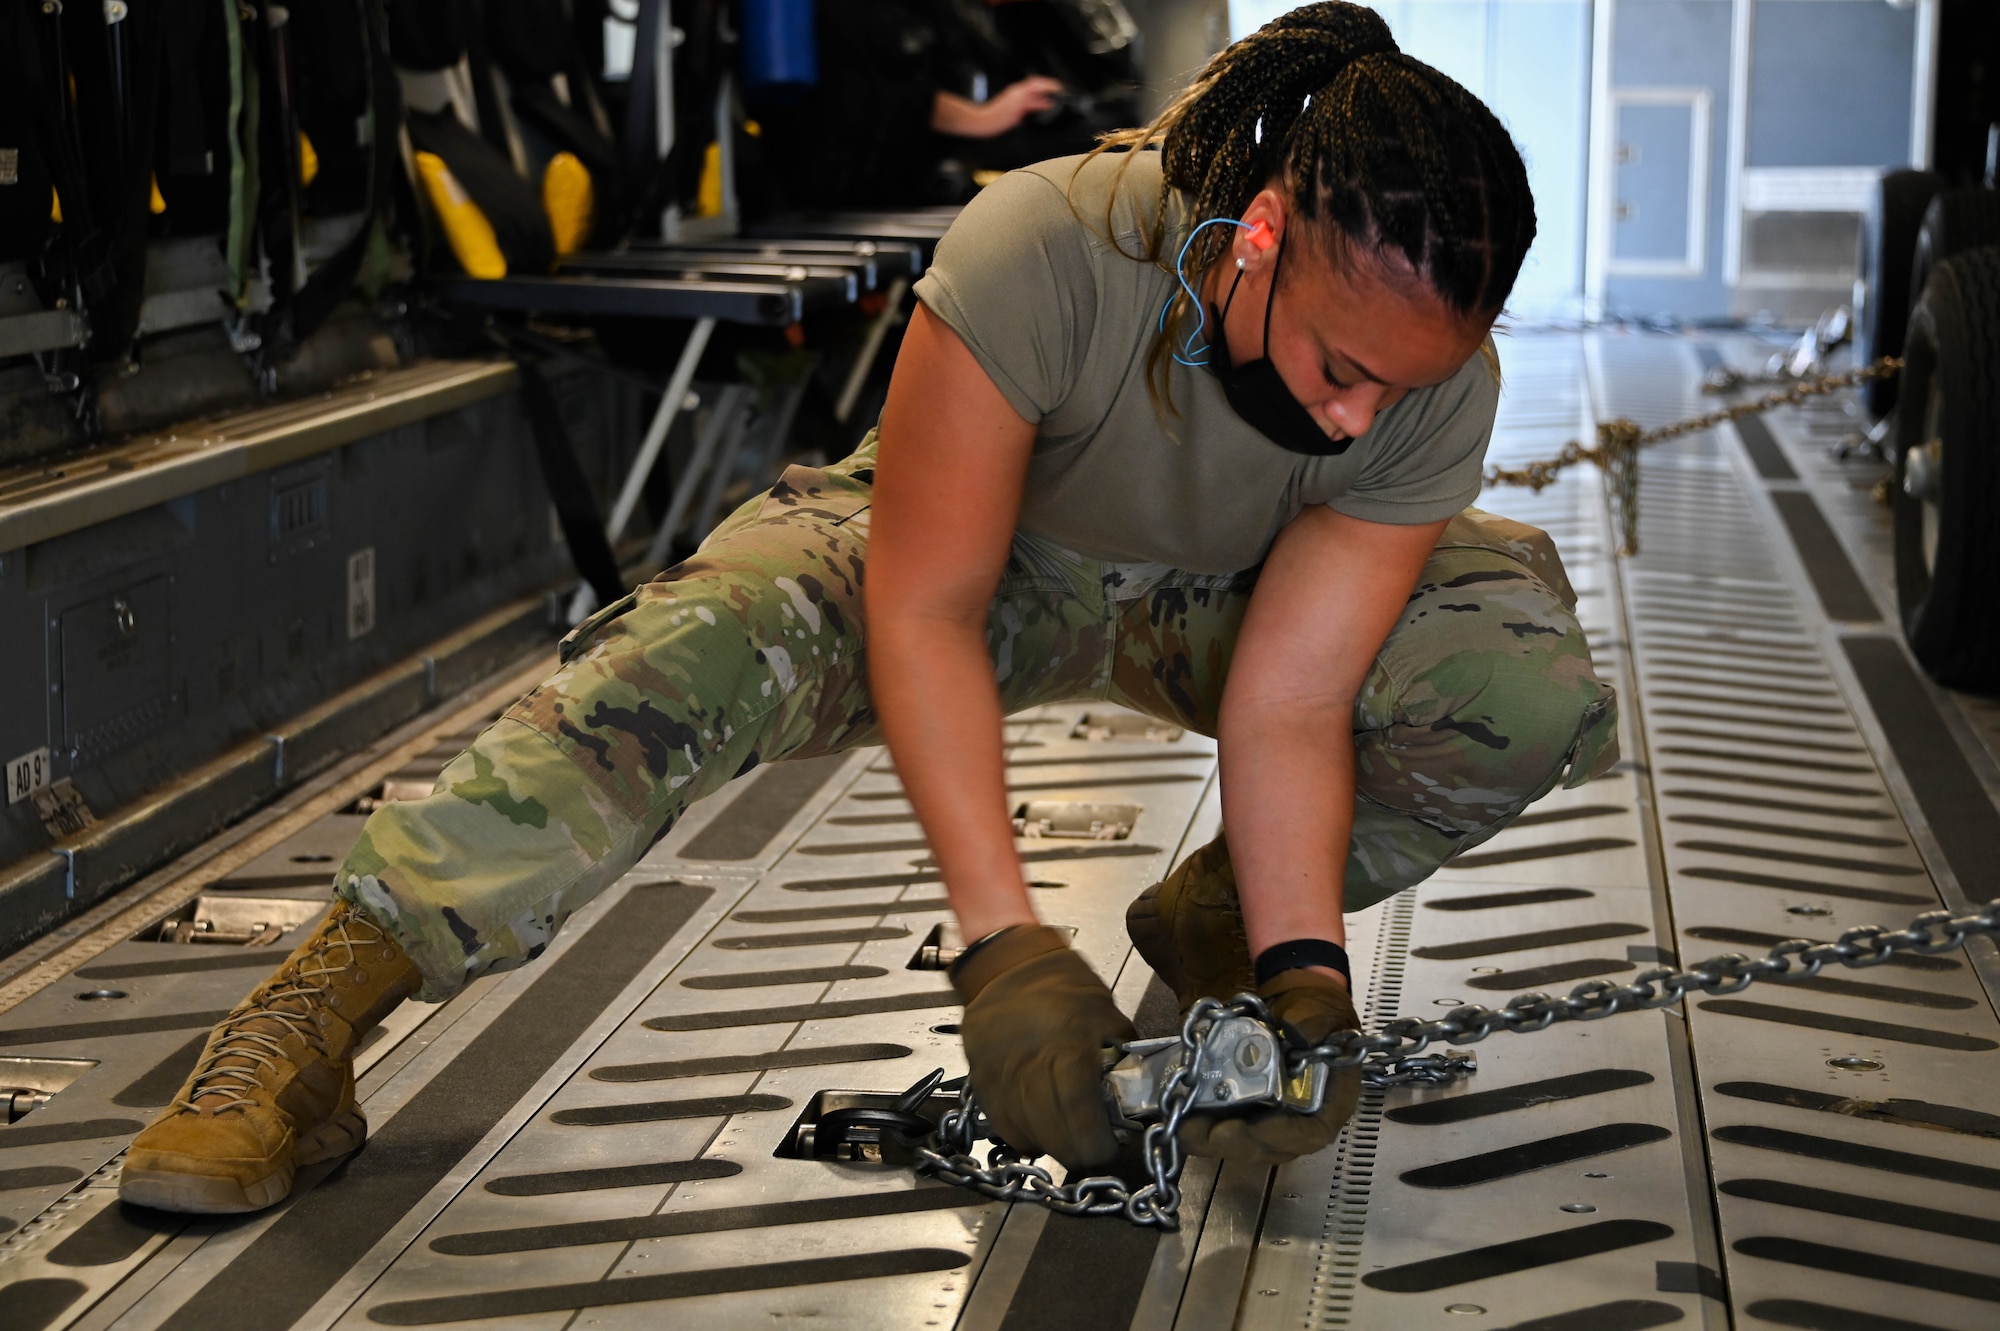 Senior Airman Felix Puello, 49th Logistics Readiness Squadron air transportation journeyman, pushes a generator onto a C-17 Globemaster III at Holloman Air Force Base, New Mexico, Sept. 9, 2021. Approximately 40 Airmen travelled to Marine Corps Base Hawaii with MQ-9 Reaper assets for programmed flying training and instructor training. (U.S. Air Force photo by Airman 1st Class Kayla Christenson)